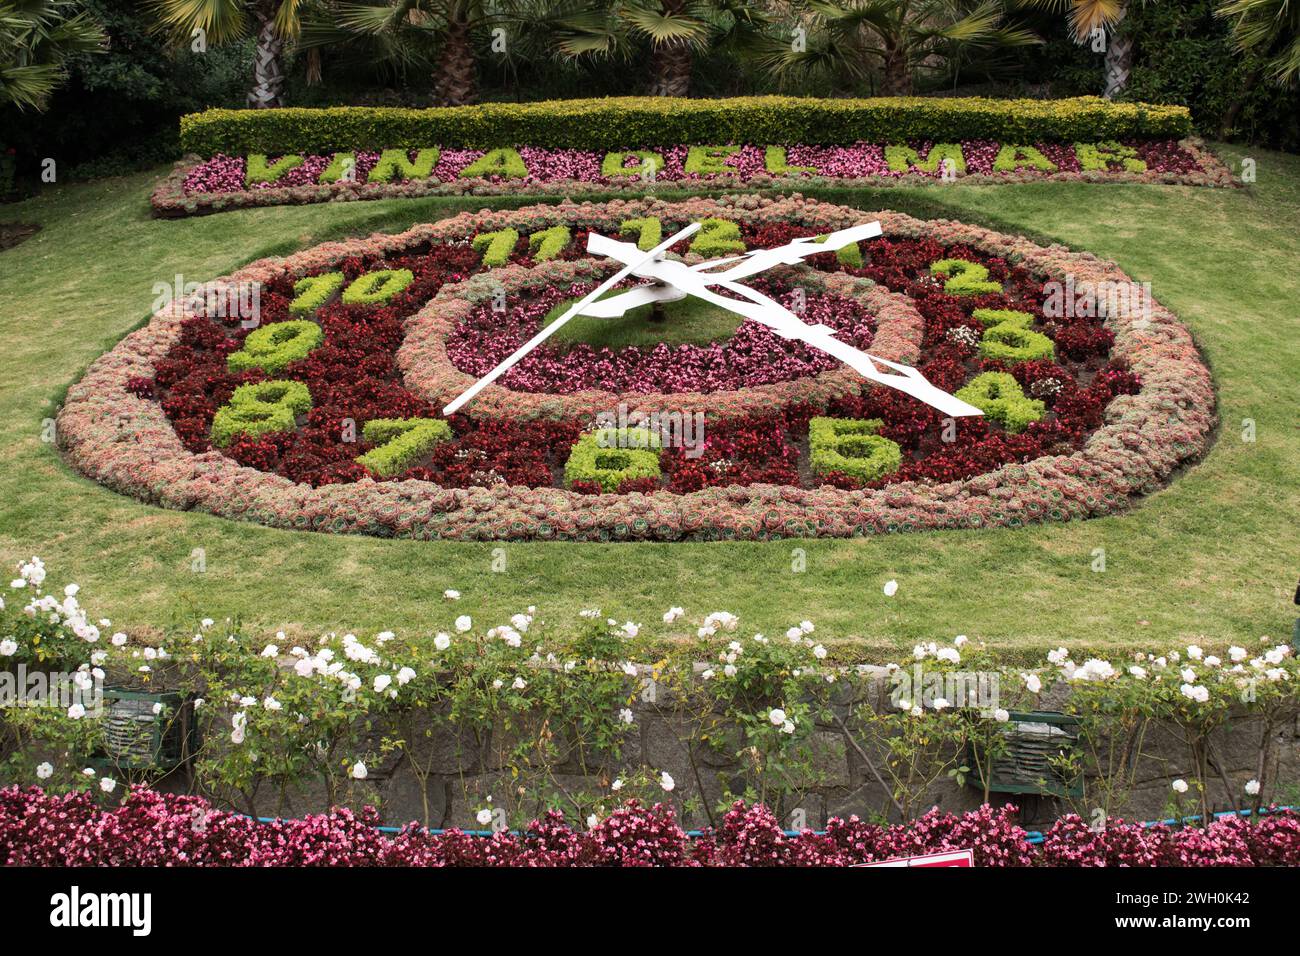 Flower Clock, is a prominent landmark located in Viña del Mar, Chile. It is a large clock made entirely of flowers. Stock Photo